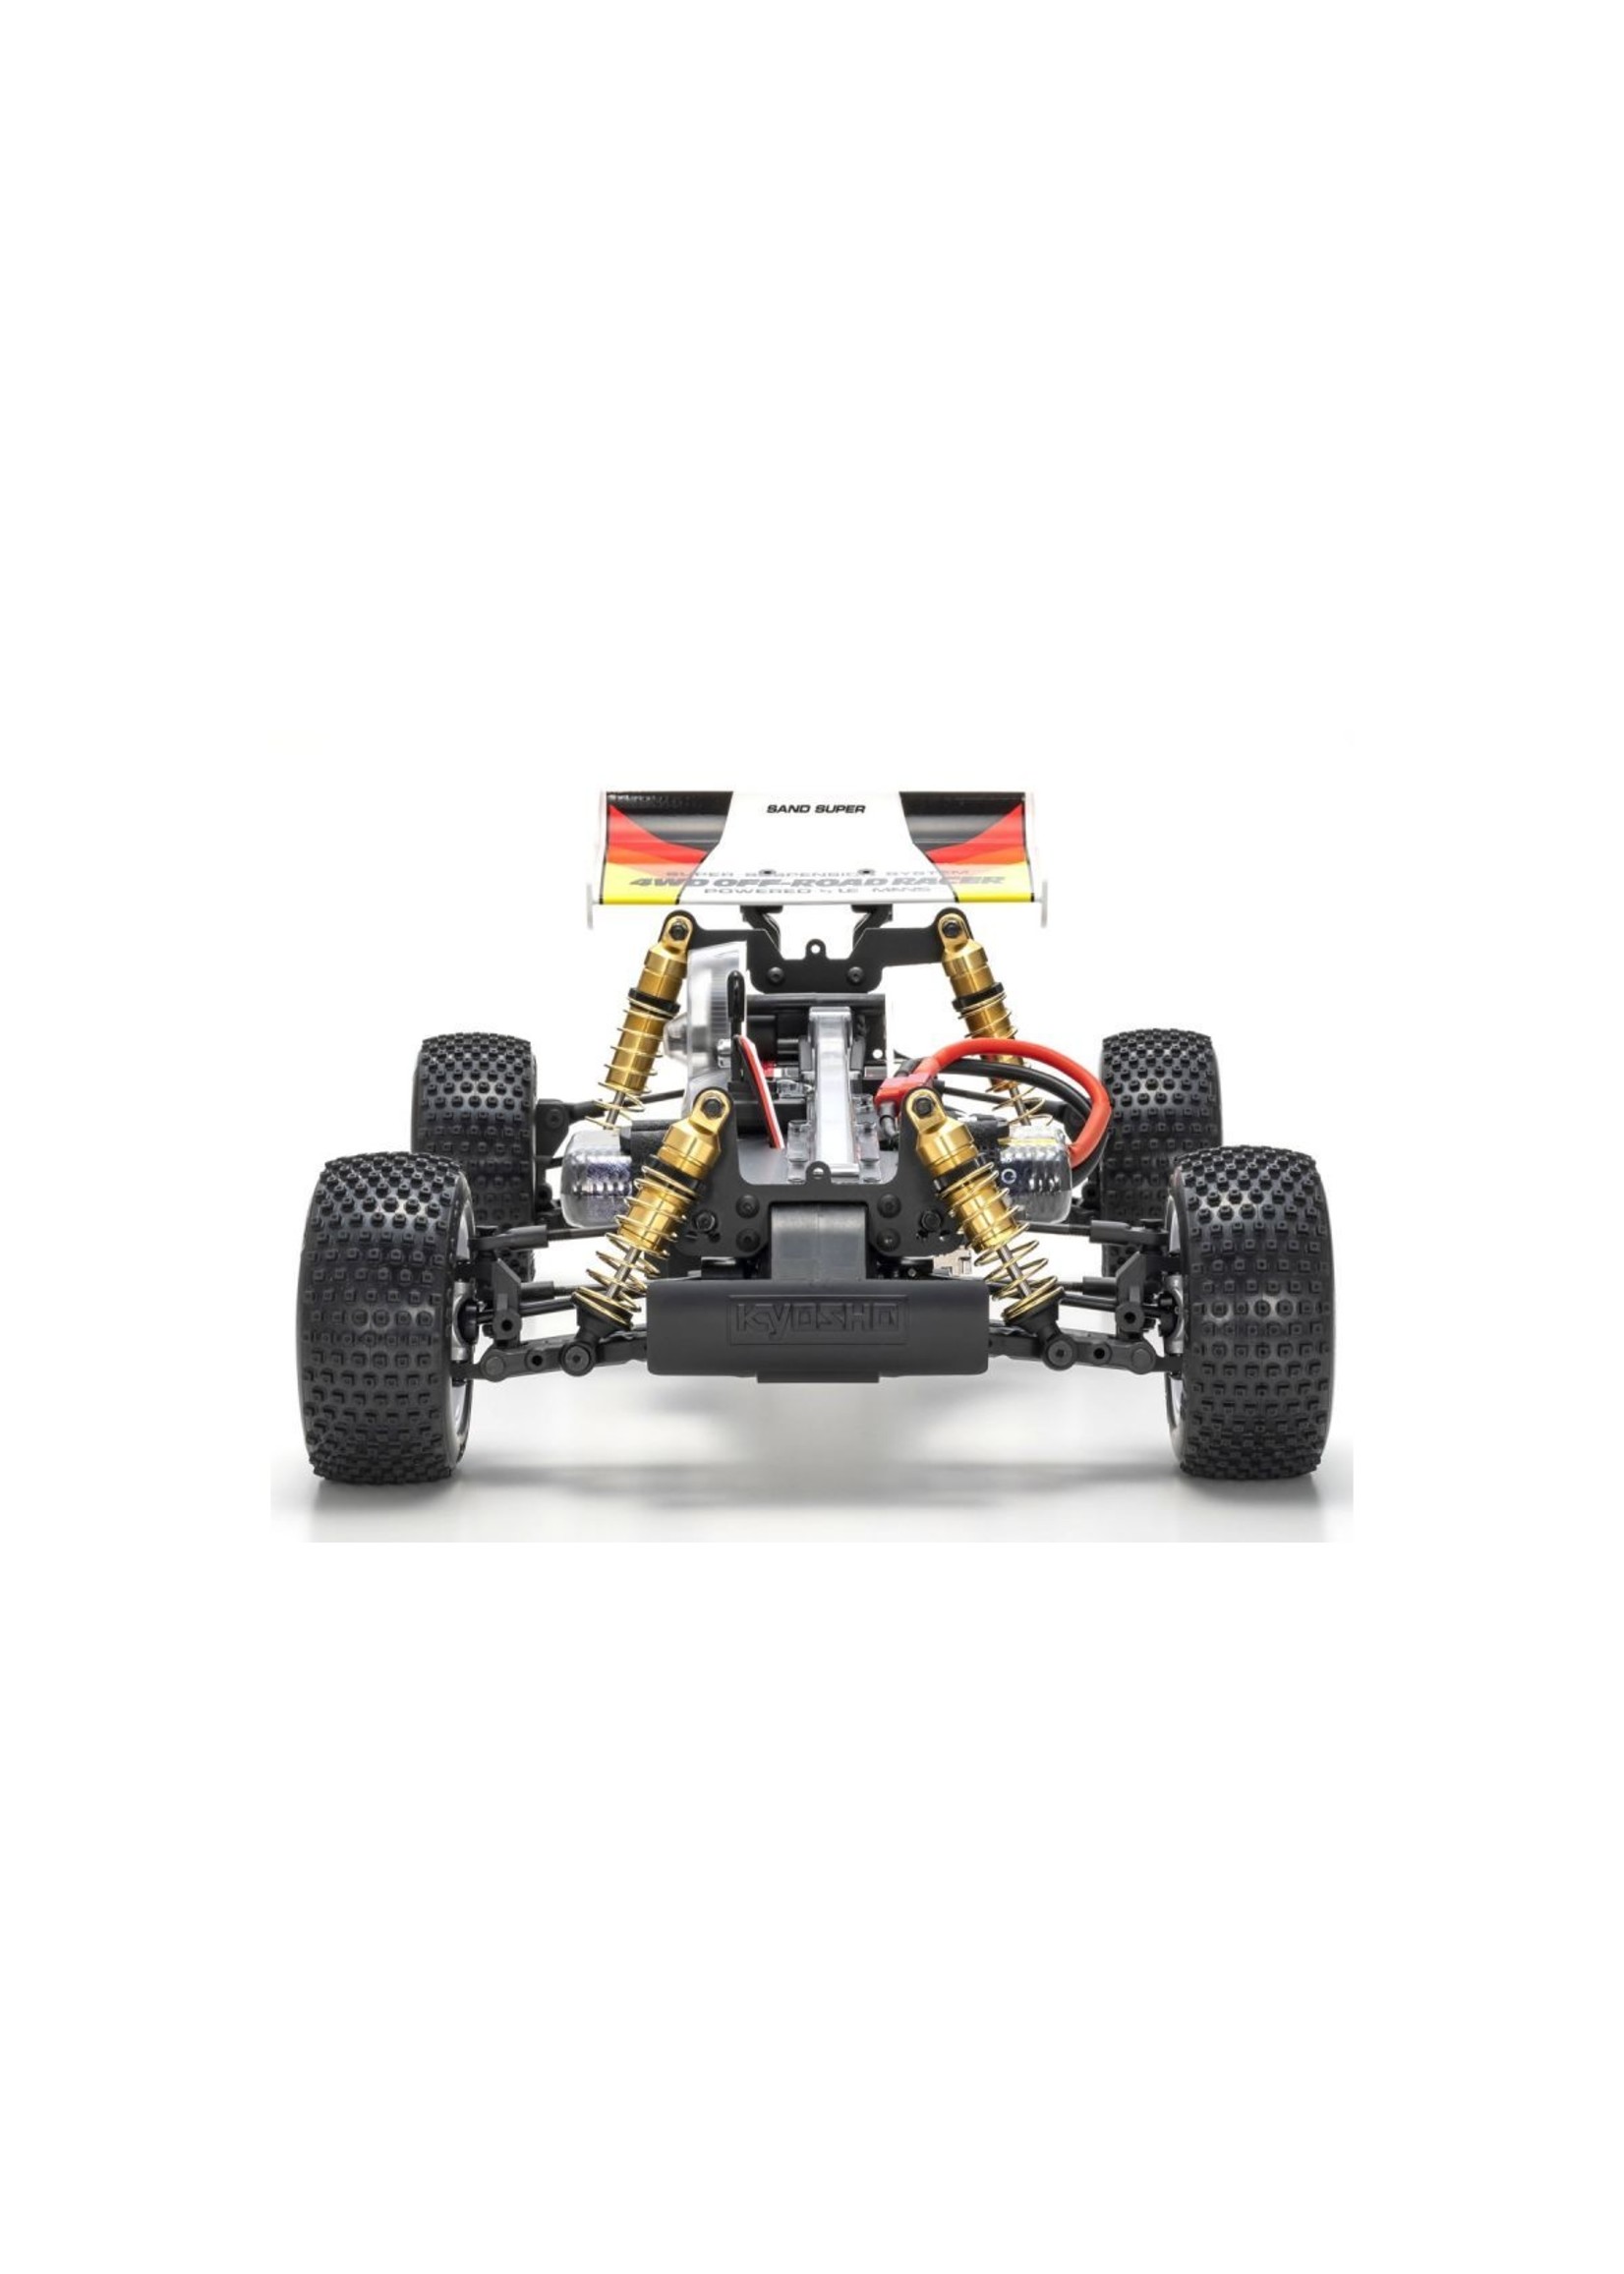 Kyosho 30622 - Optima Mid 4wd Buggy Kit With Turbo Optima Mid Decals And Wing